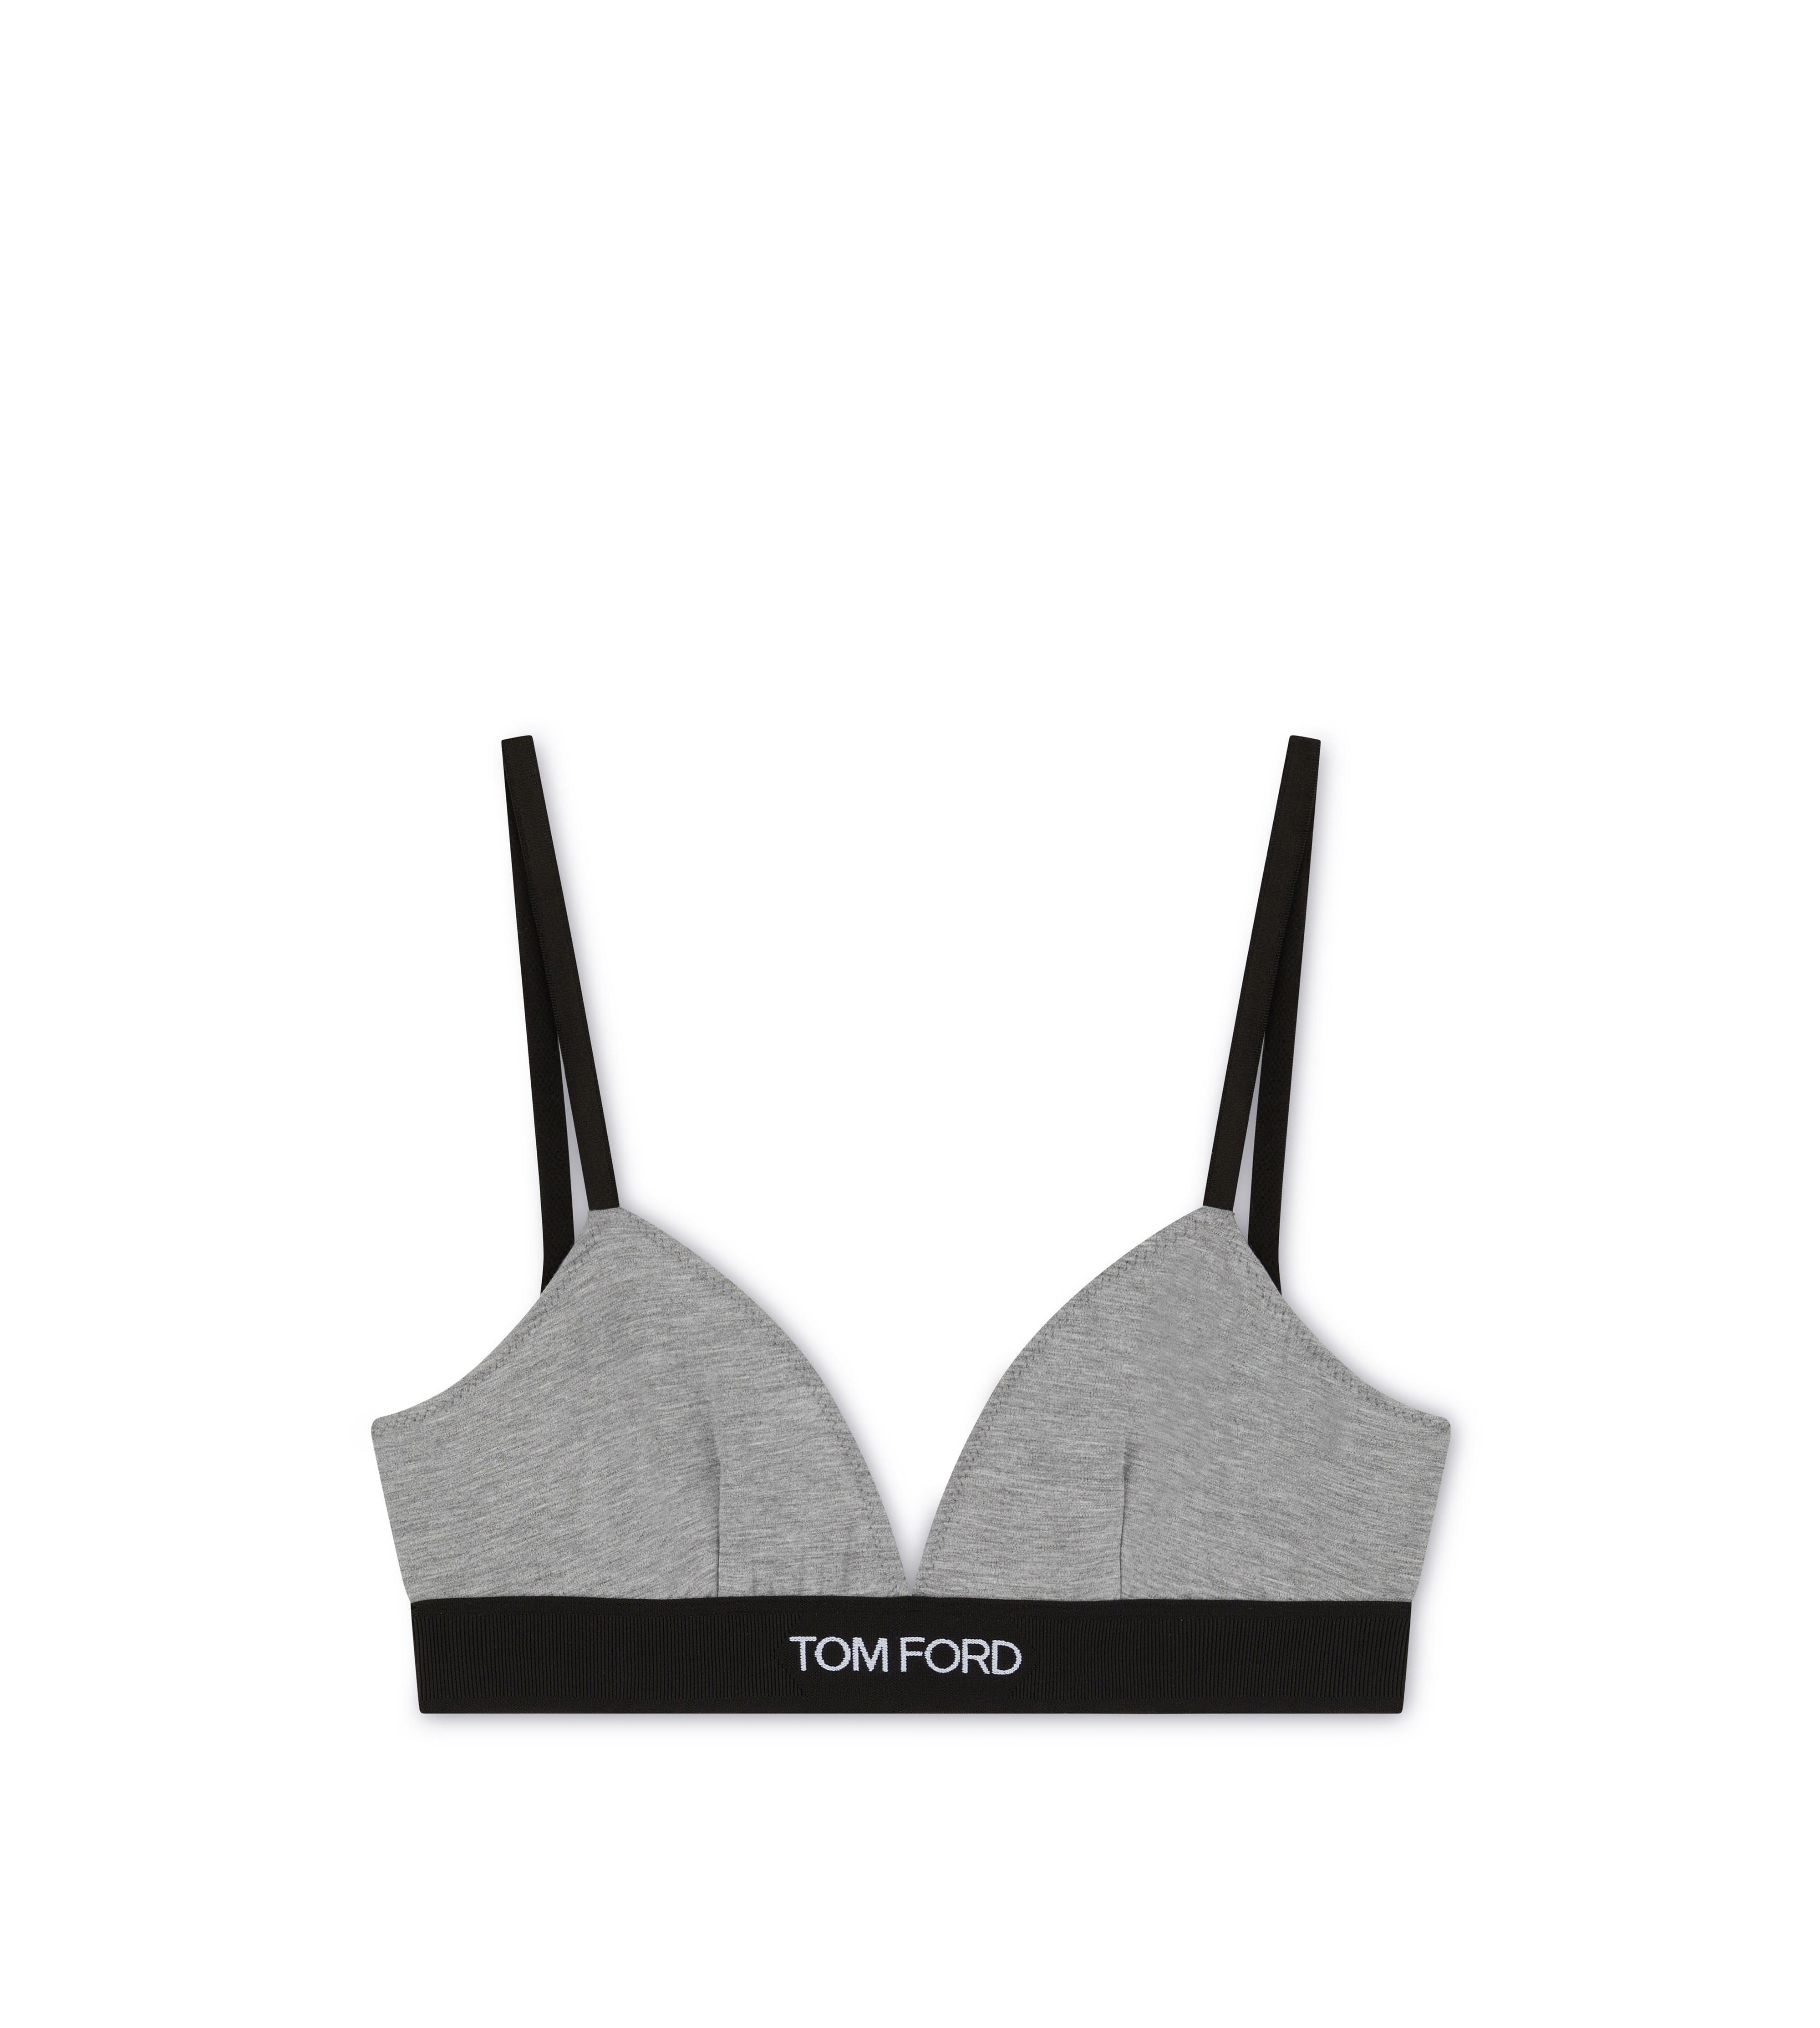 Tom Ford Modal Signature Bralette, Bra and Boxers